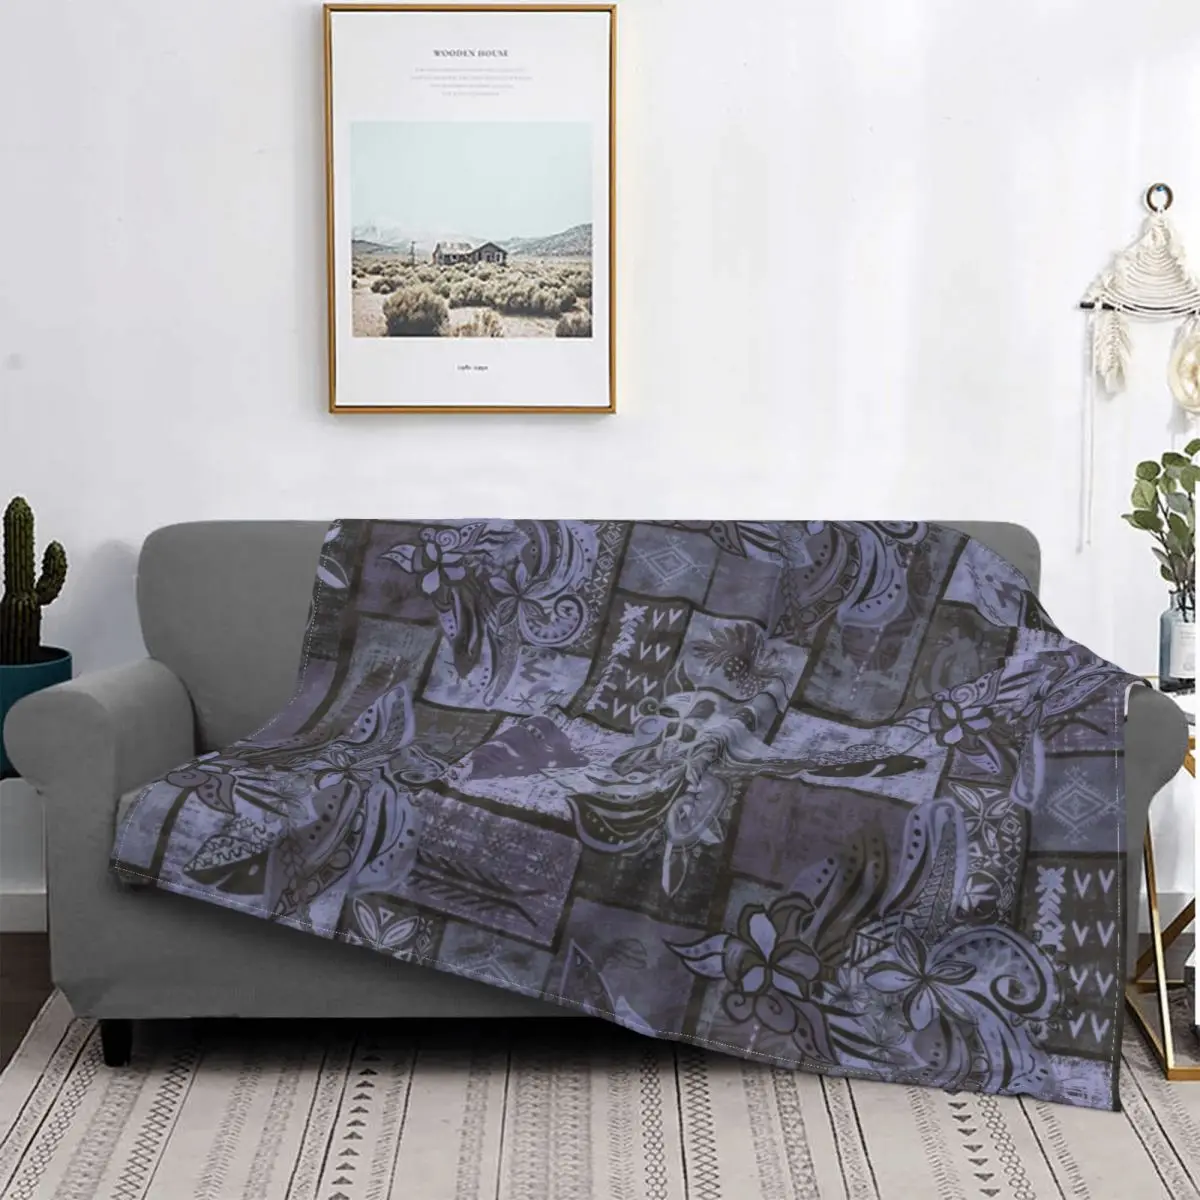 

Midnight Blue Samoan Patchwork Tapa Artboard Blanket Flannel Warm Throw Blanket Sofa Throw Blanket for Couch Bedding Outdoor